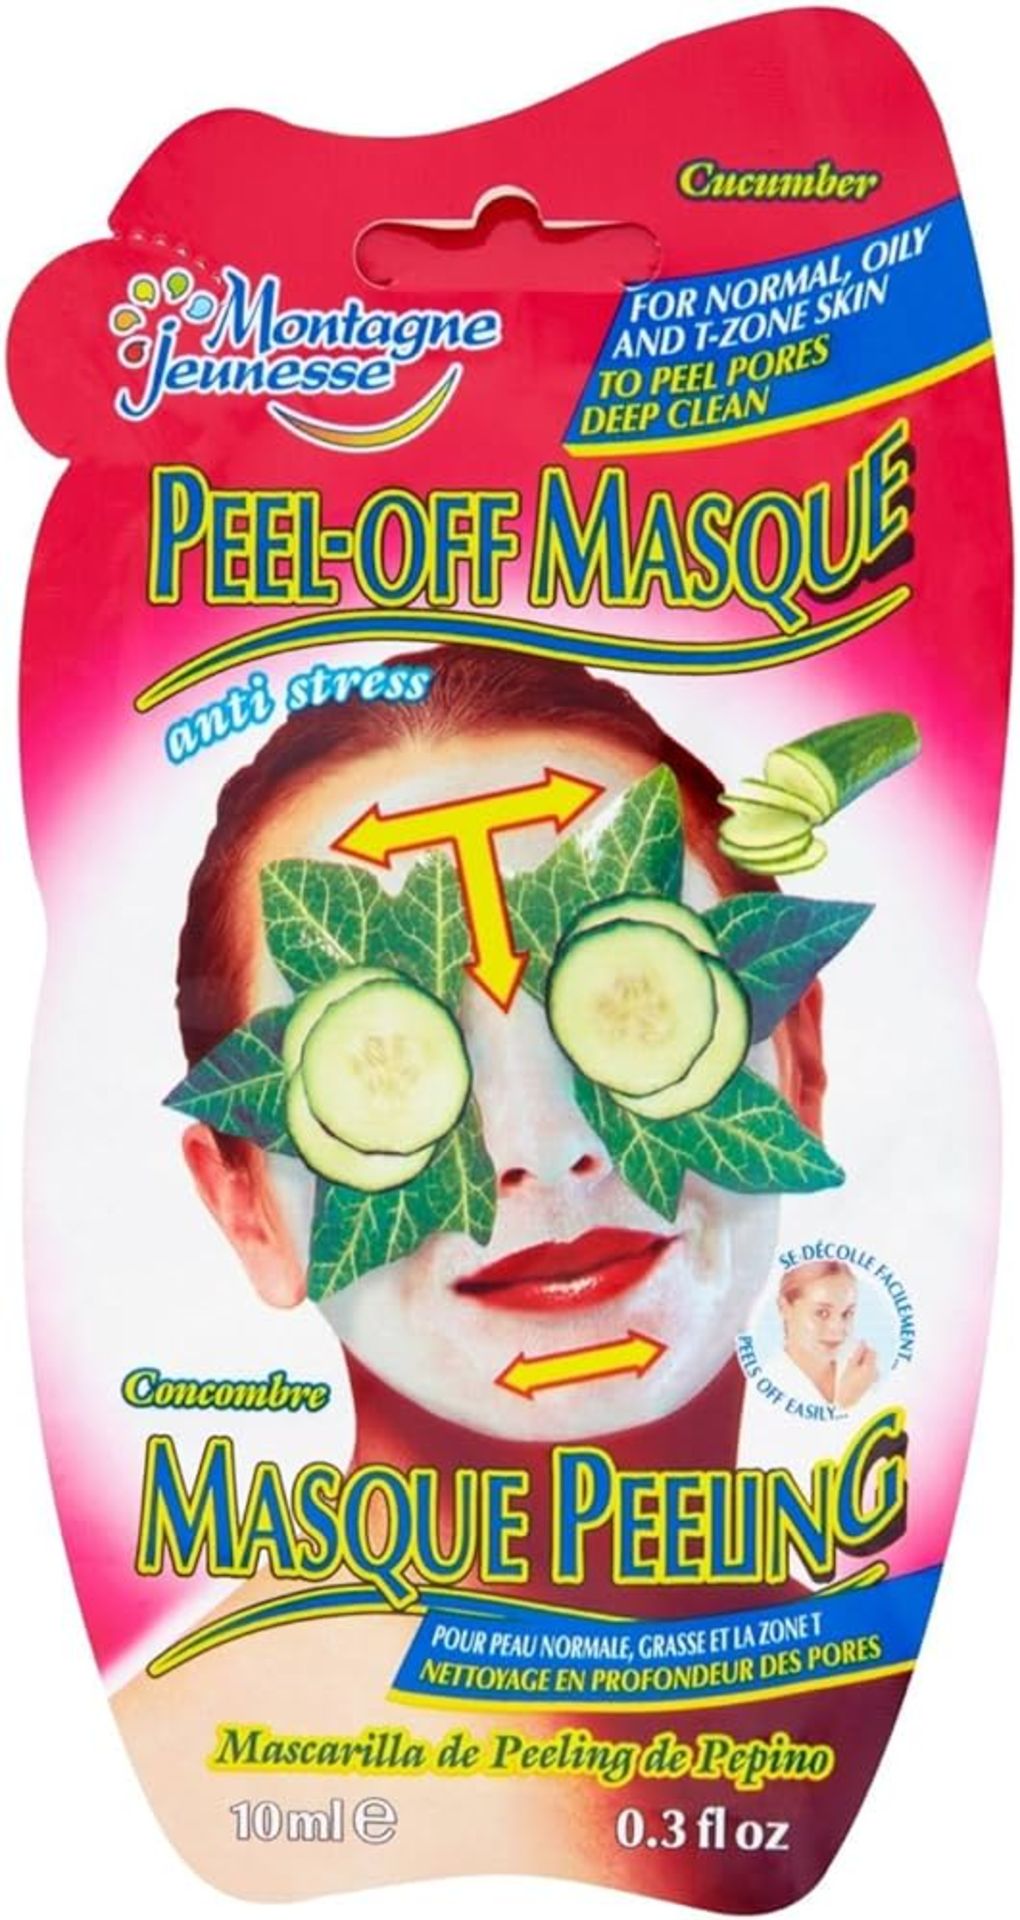 Bulk Trade Lot 2,000 x Montagne Jeunesse Face Masks. RRPs Vary from £2.50 - £6. This lot has a RRP - Image 4 of 16